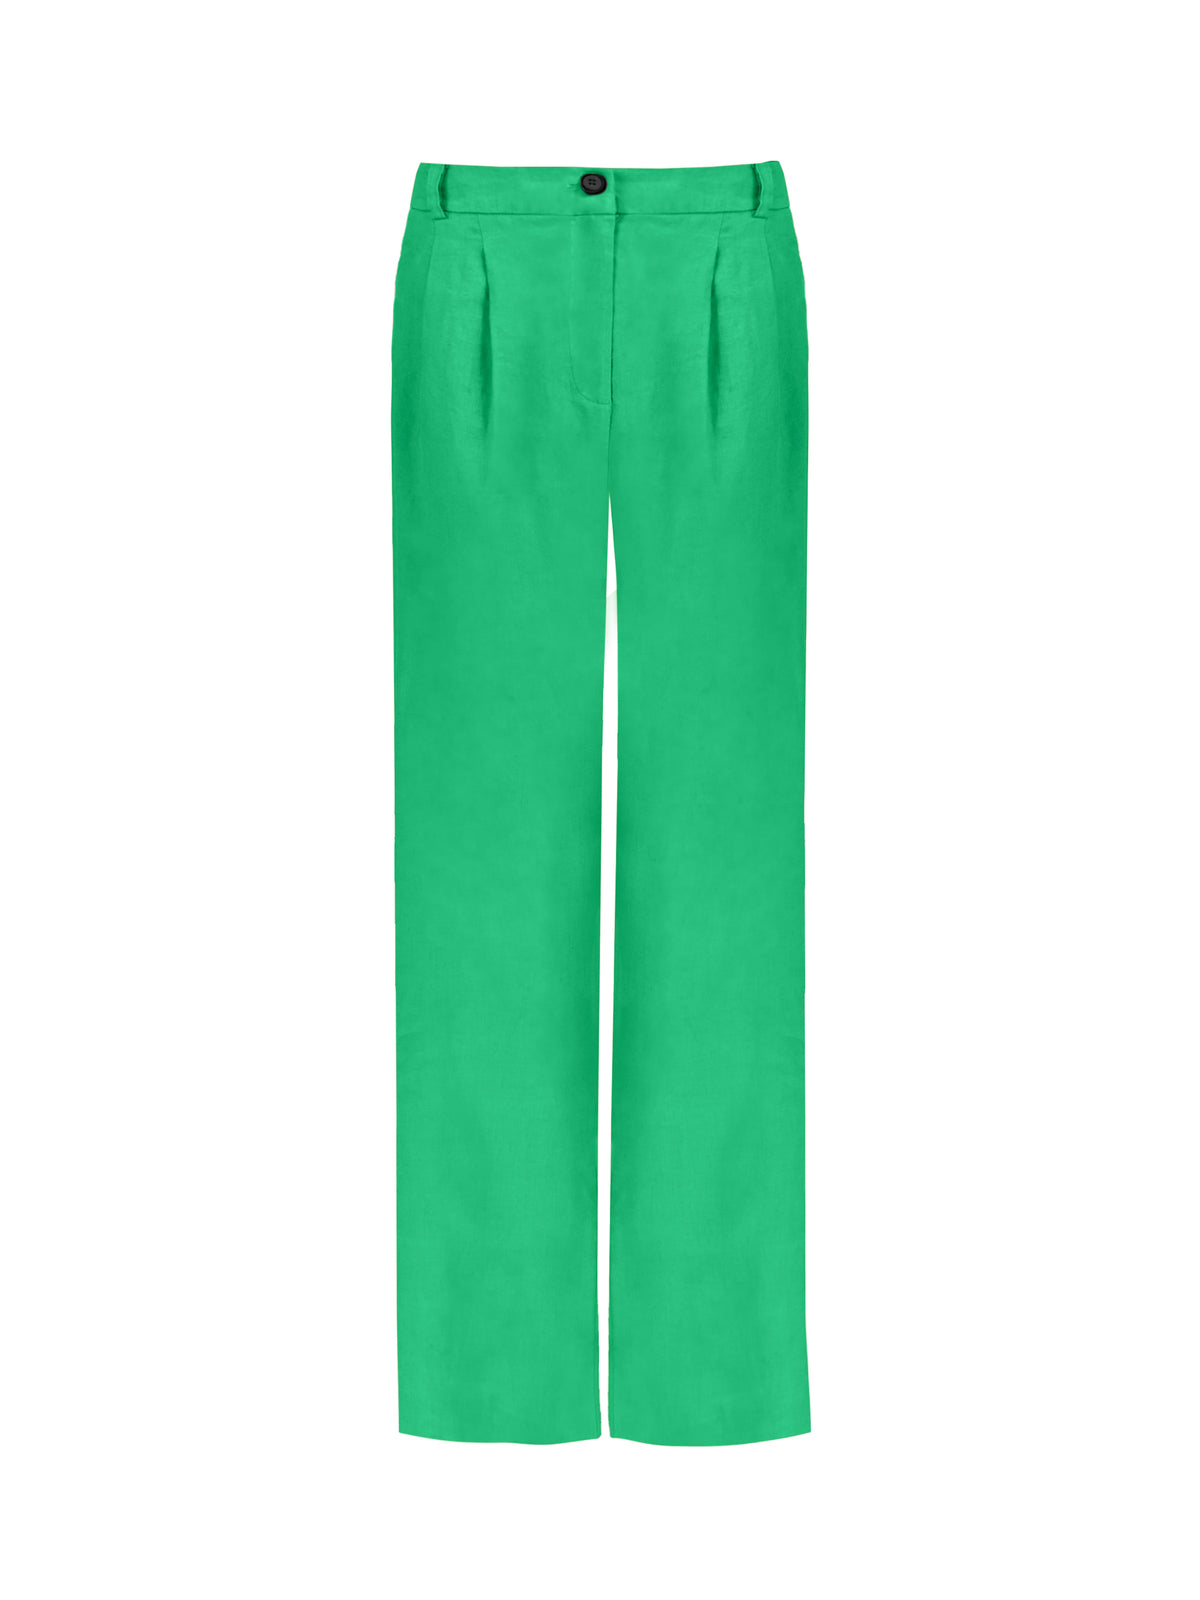 Green Linen Button Front Trousers